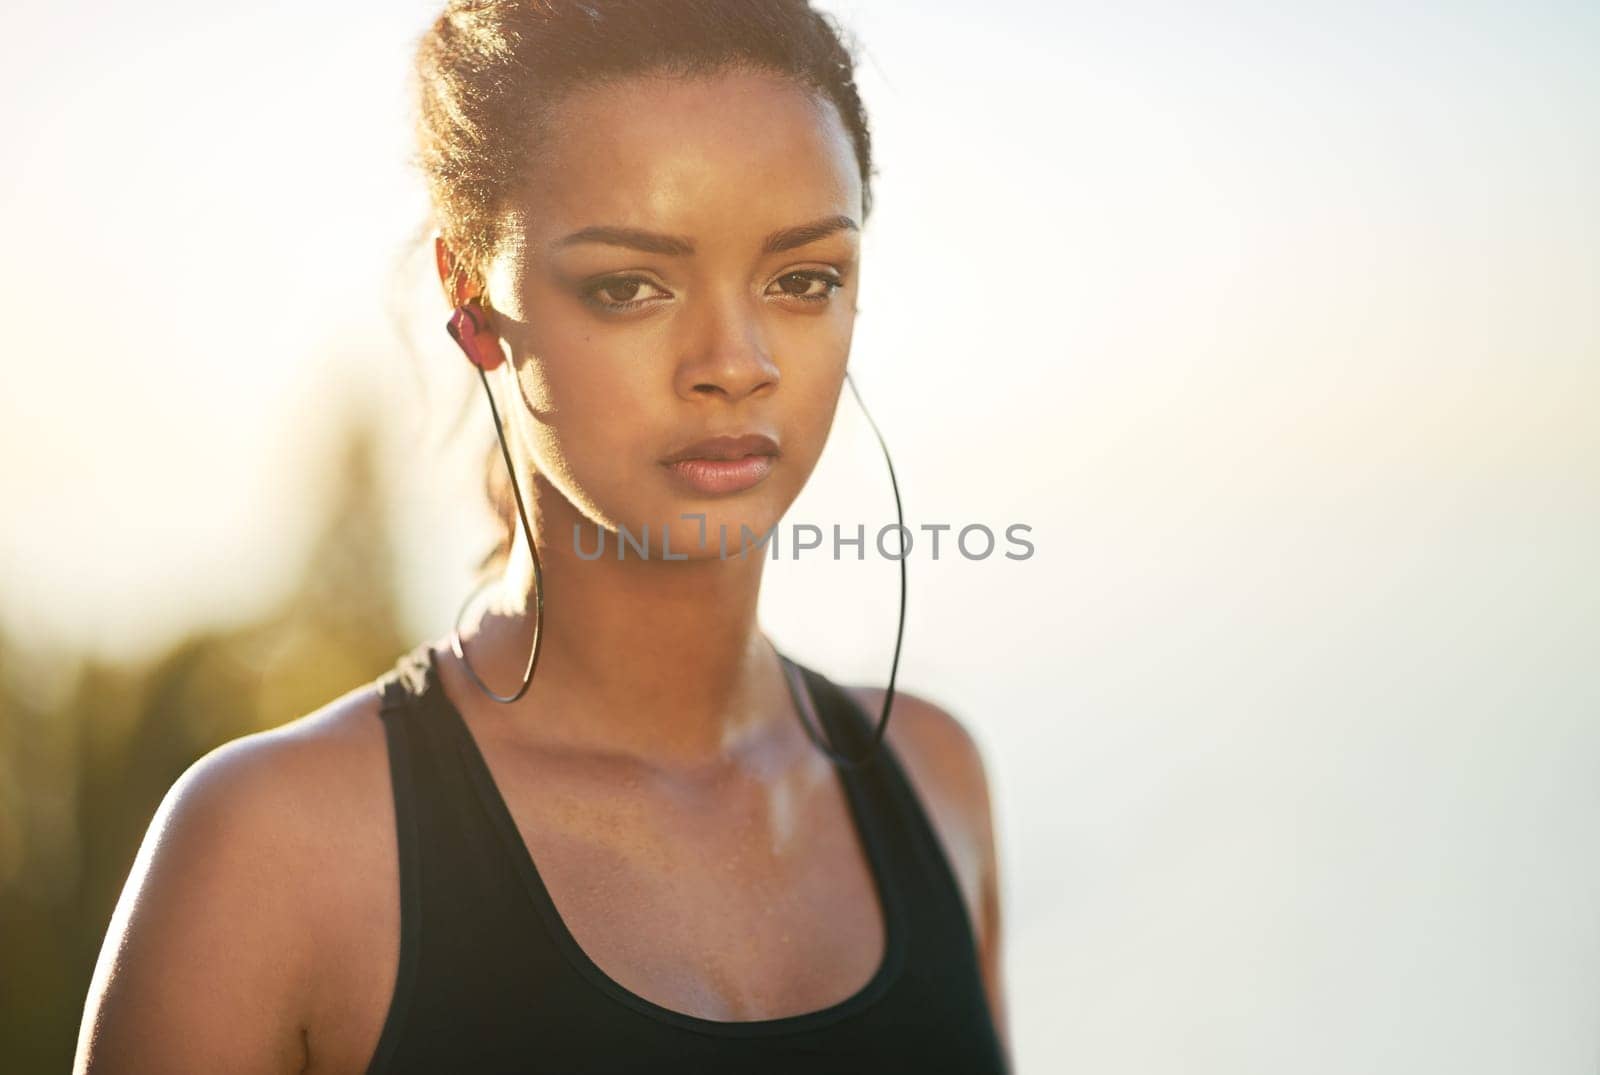 Portrait, woman and streaming music on run for wellness, health and lifestyle on break in Brazil. Athlete, outdoors and training in sportswear for cardio, workout and fitness for marathon in city.